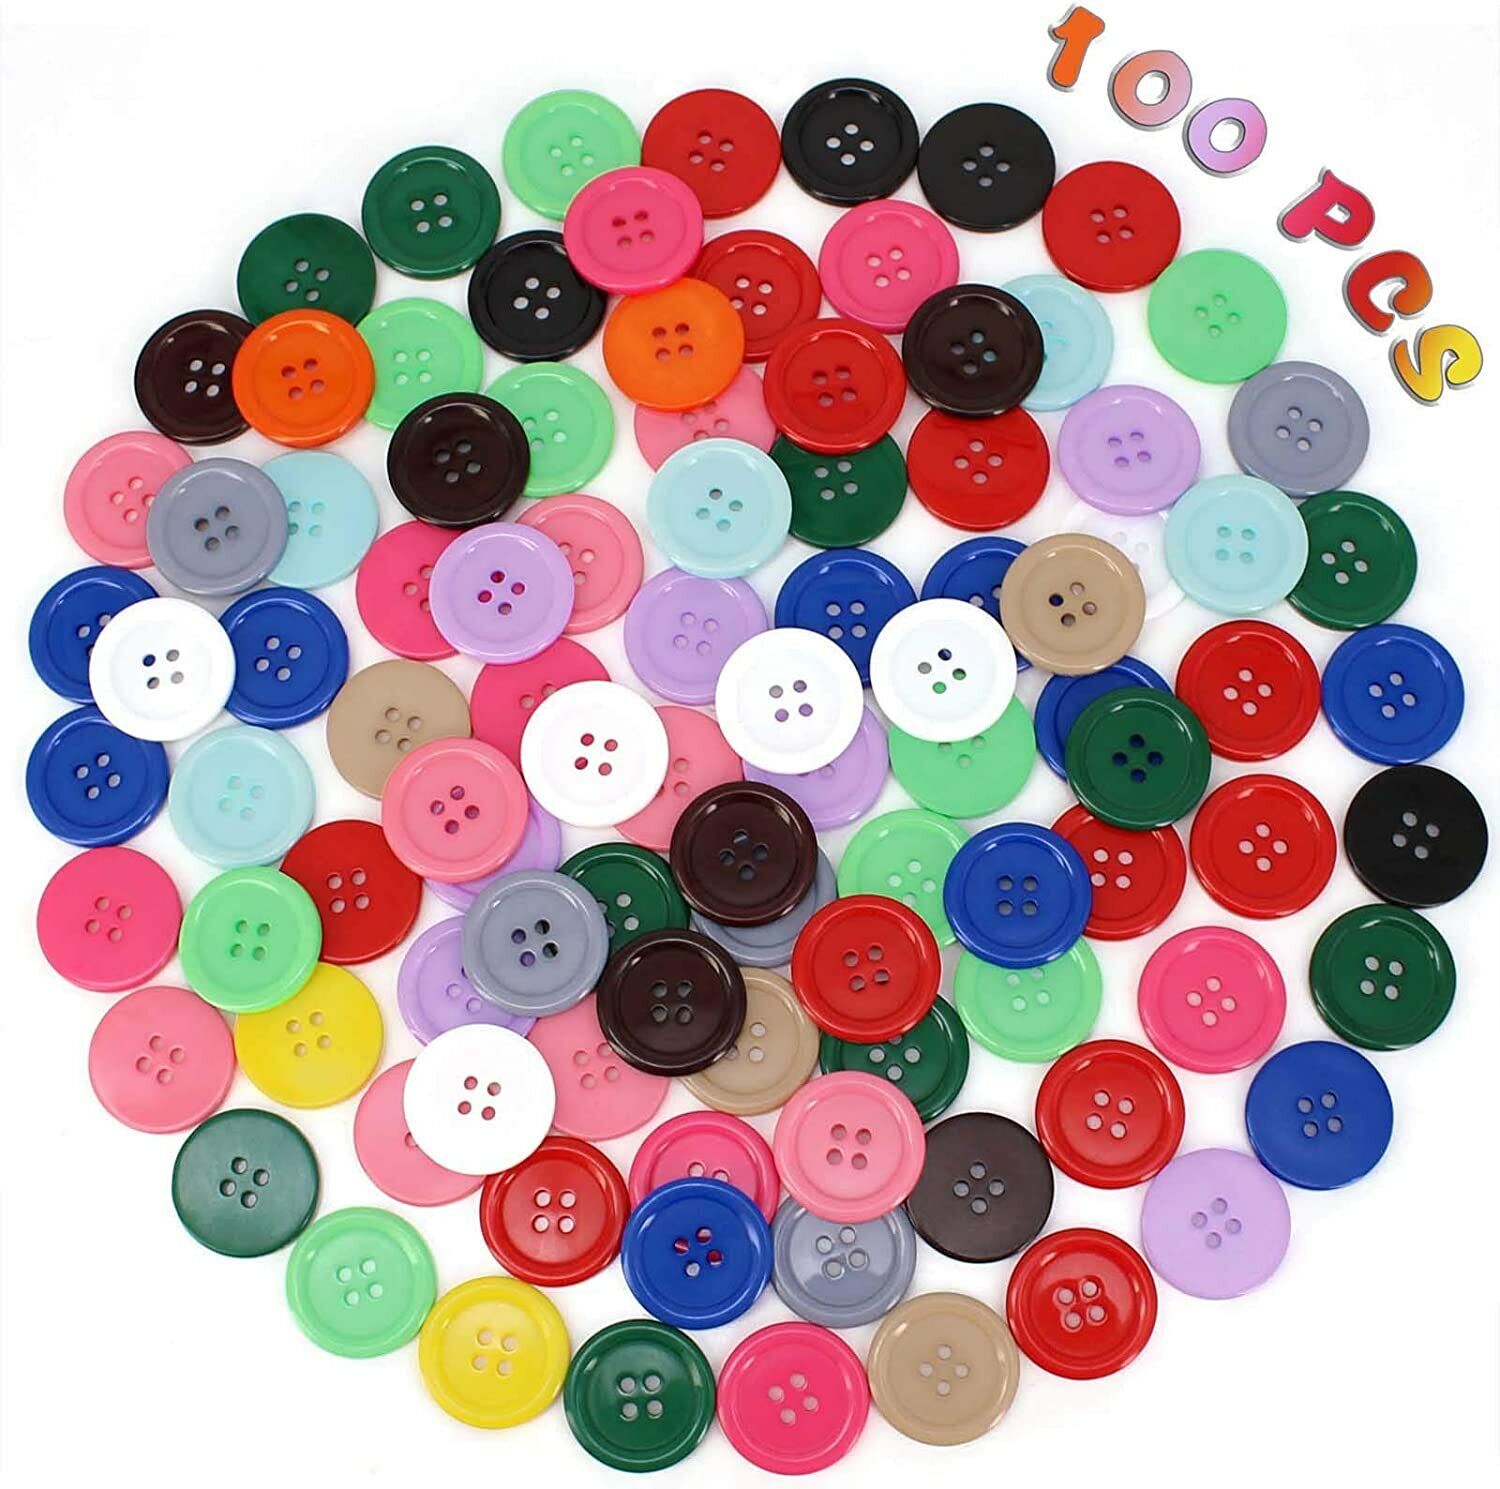 Bofoho 100 Pcs 1 inch Resin Sewing Buttons 15 Colors 4 Holes Flatback Round Multicolor